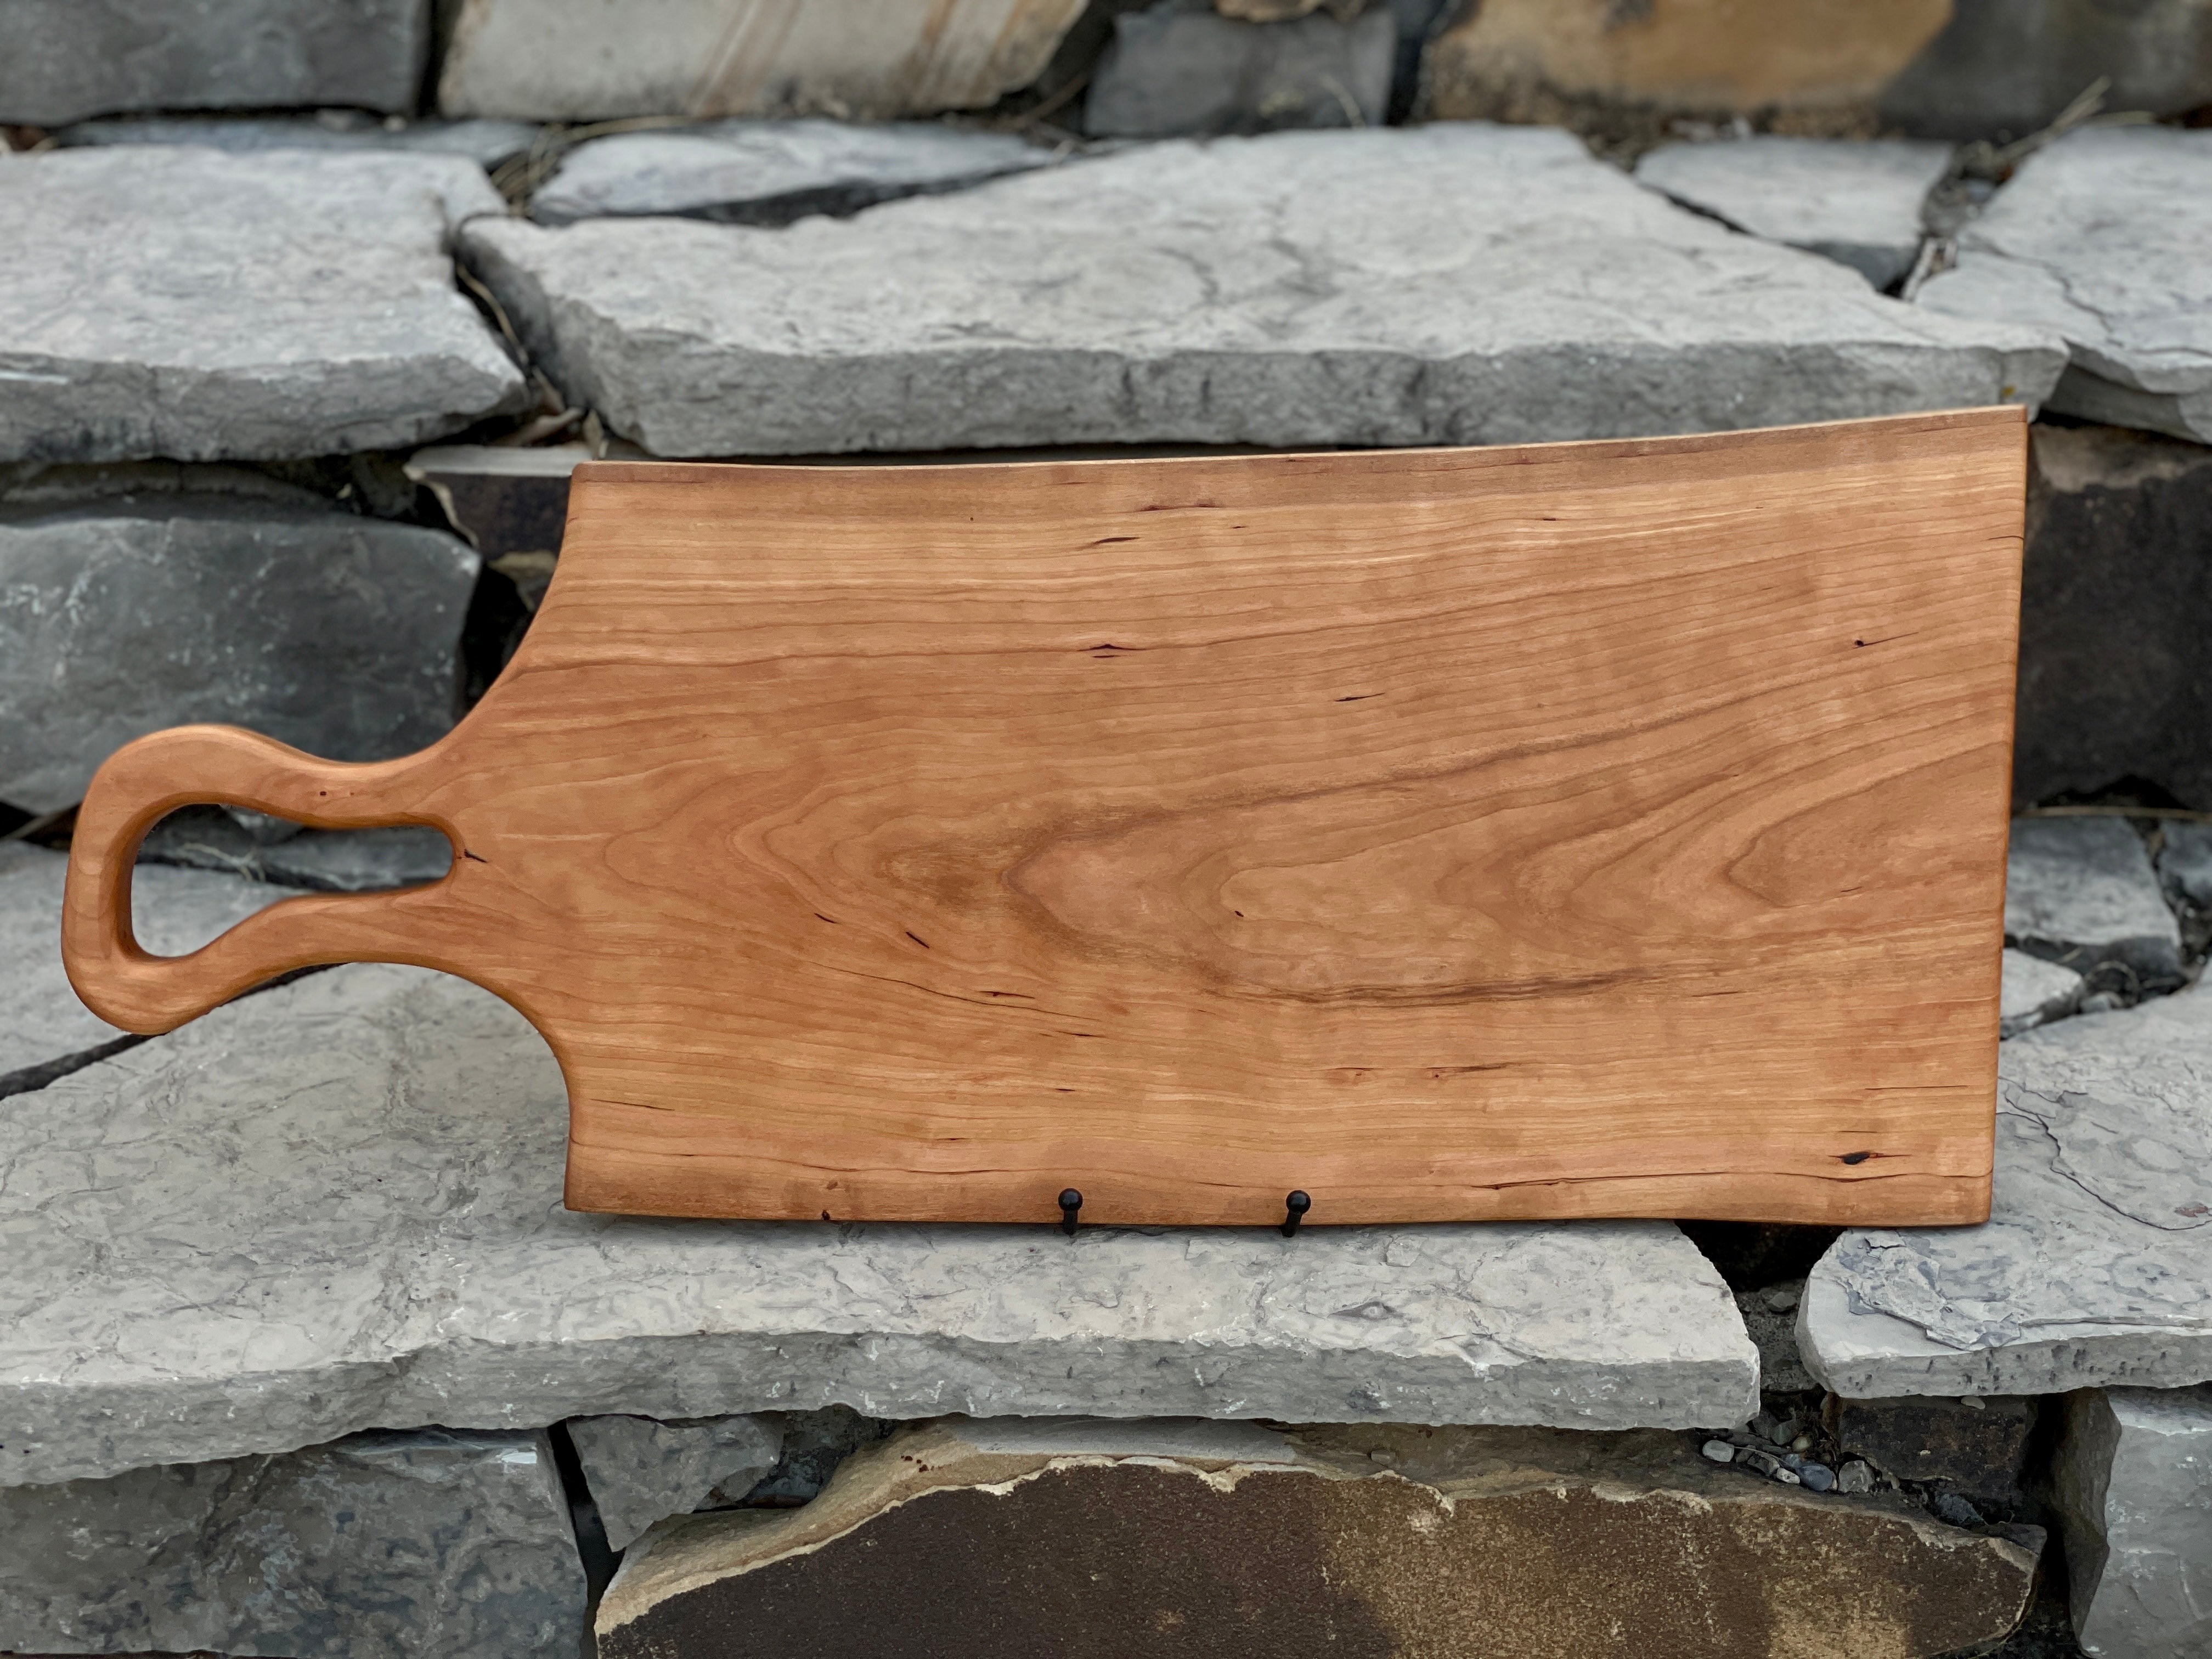 Natural hand crafted solid cherry live edge wood cutting board